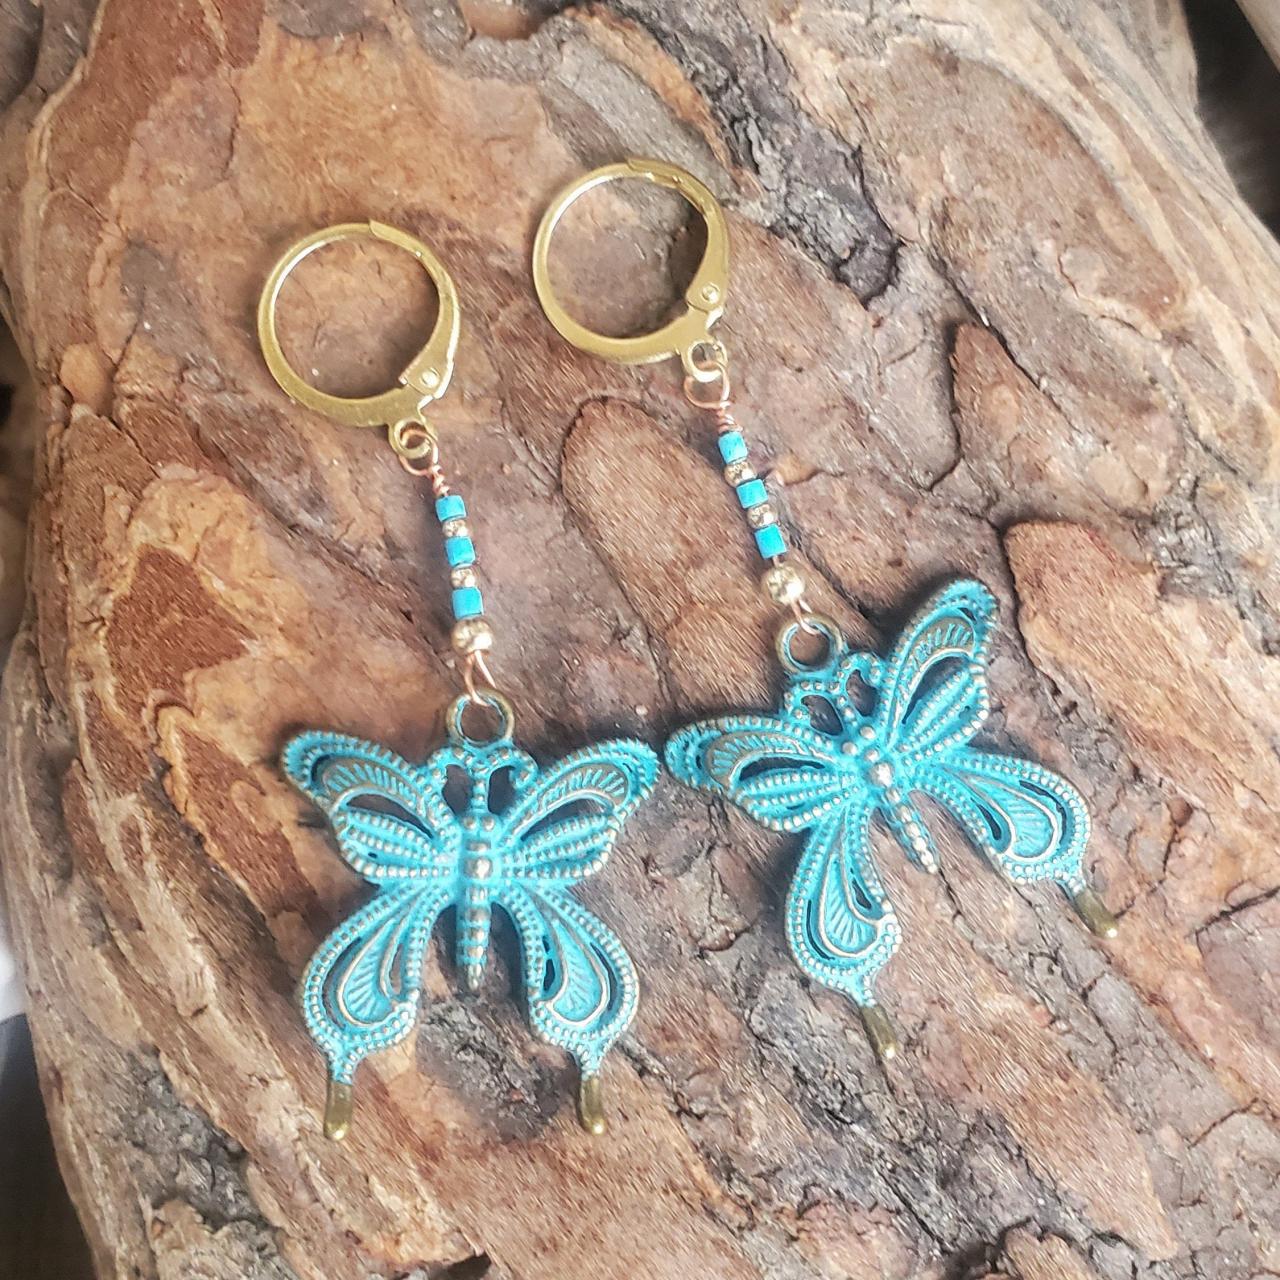 Brass Patina Butterfly Earrings With Turquoise Natural Healing Gemstones And Lever Back Wires